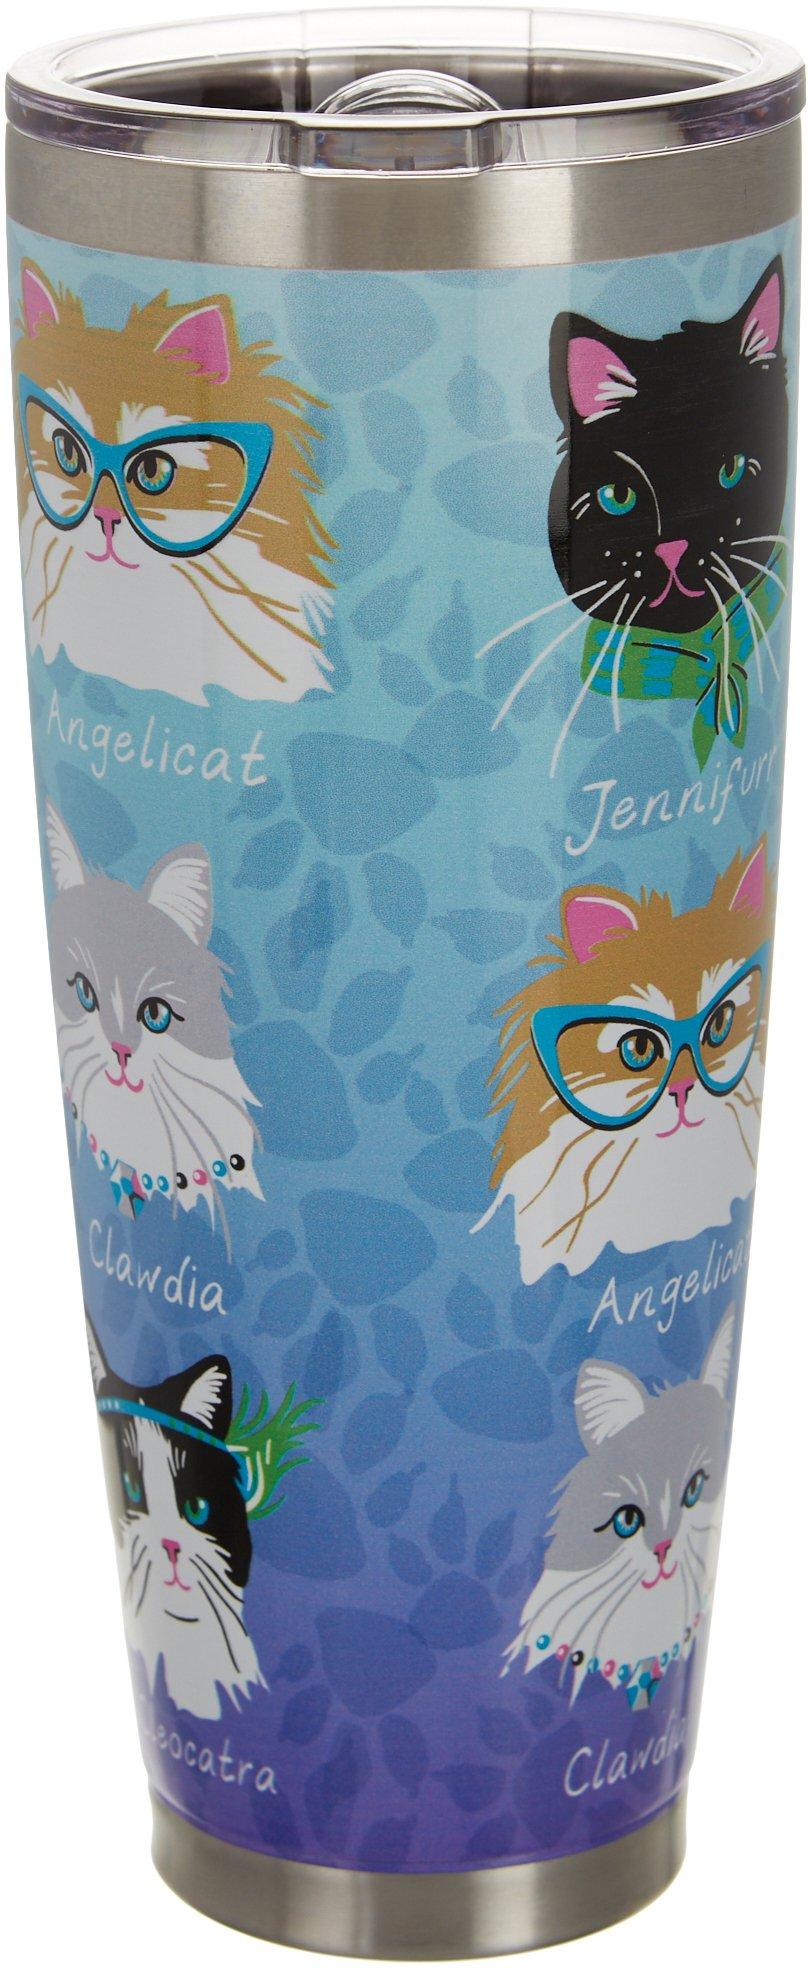 30 oz. Stainless Steel Catastic Tumbler